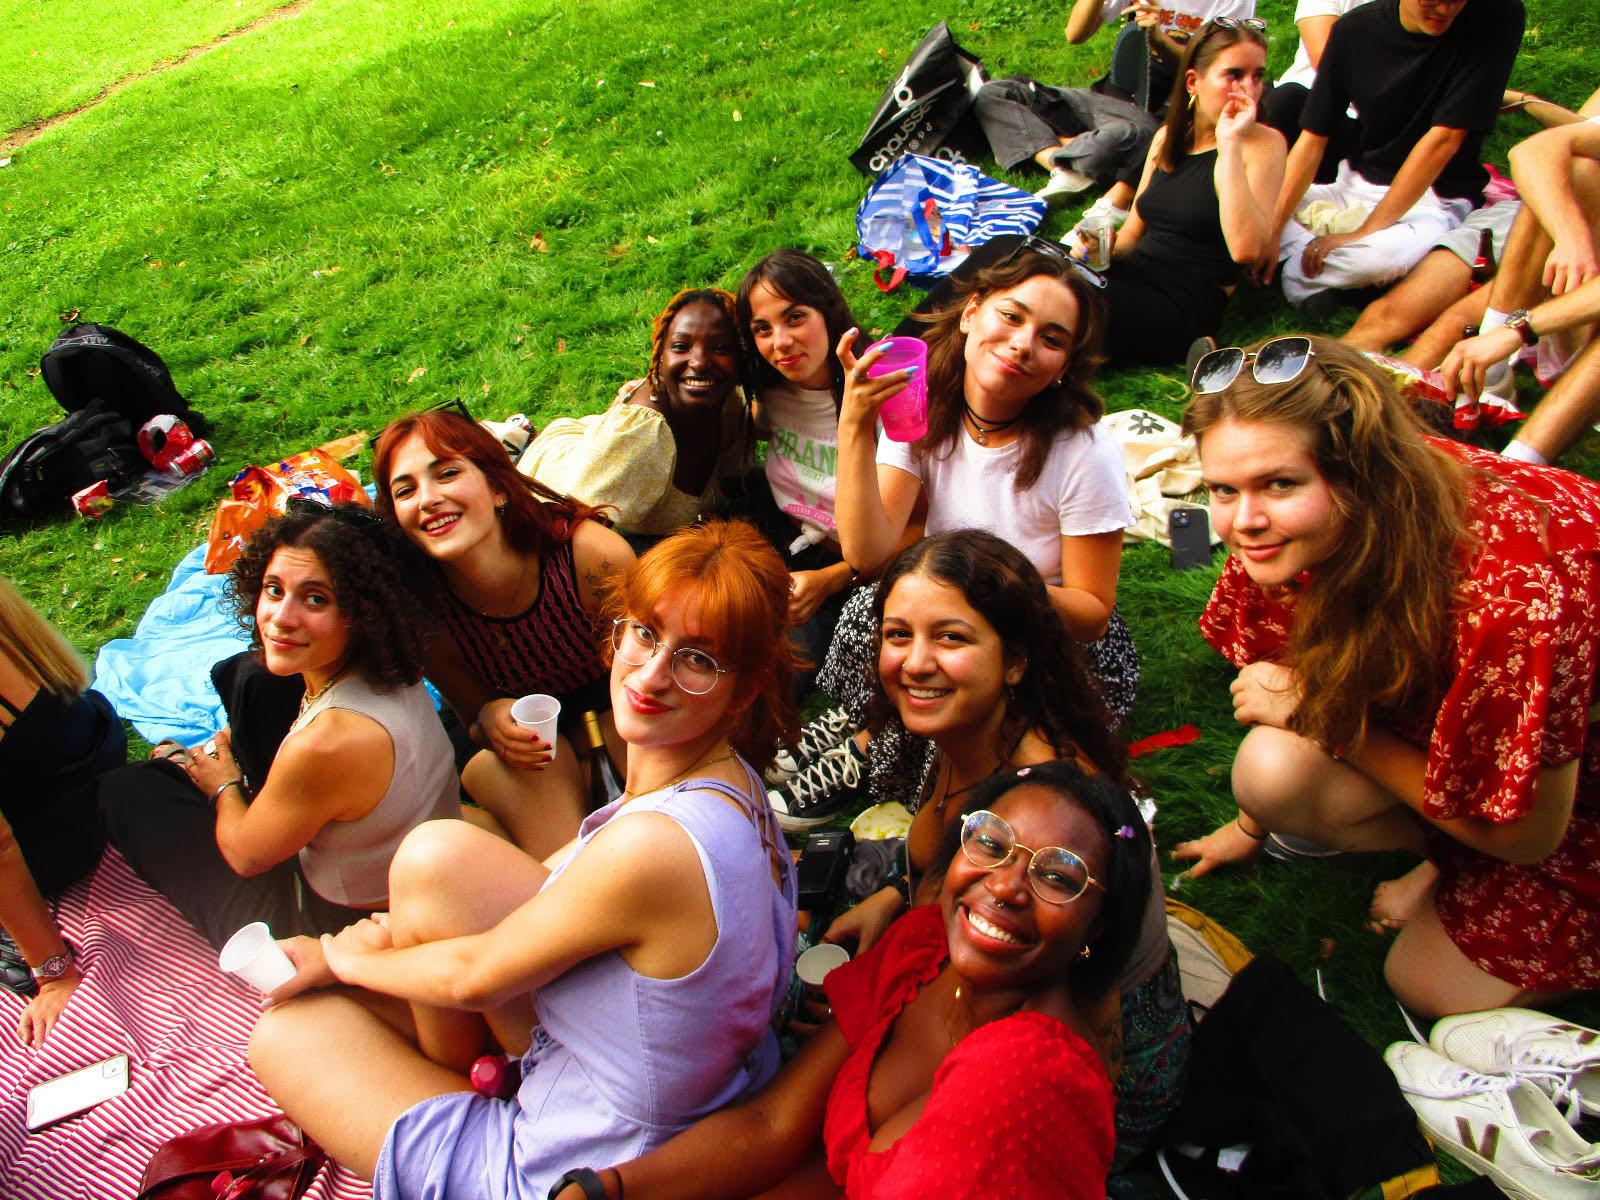 A group of women sitting on the grass

Description automatically generated